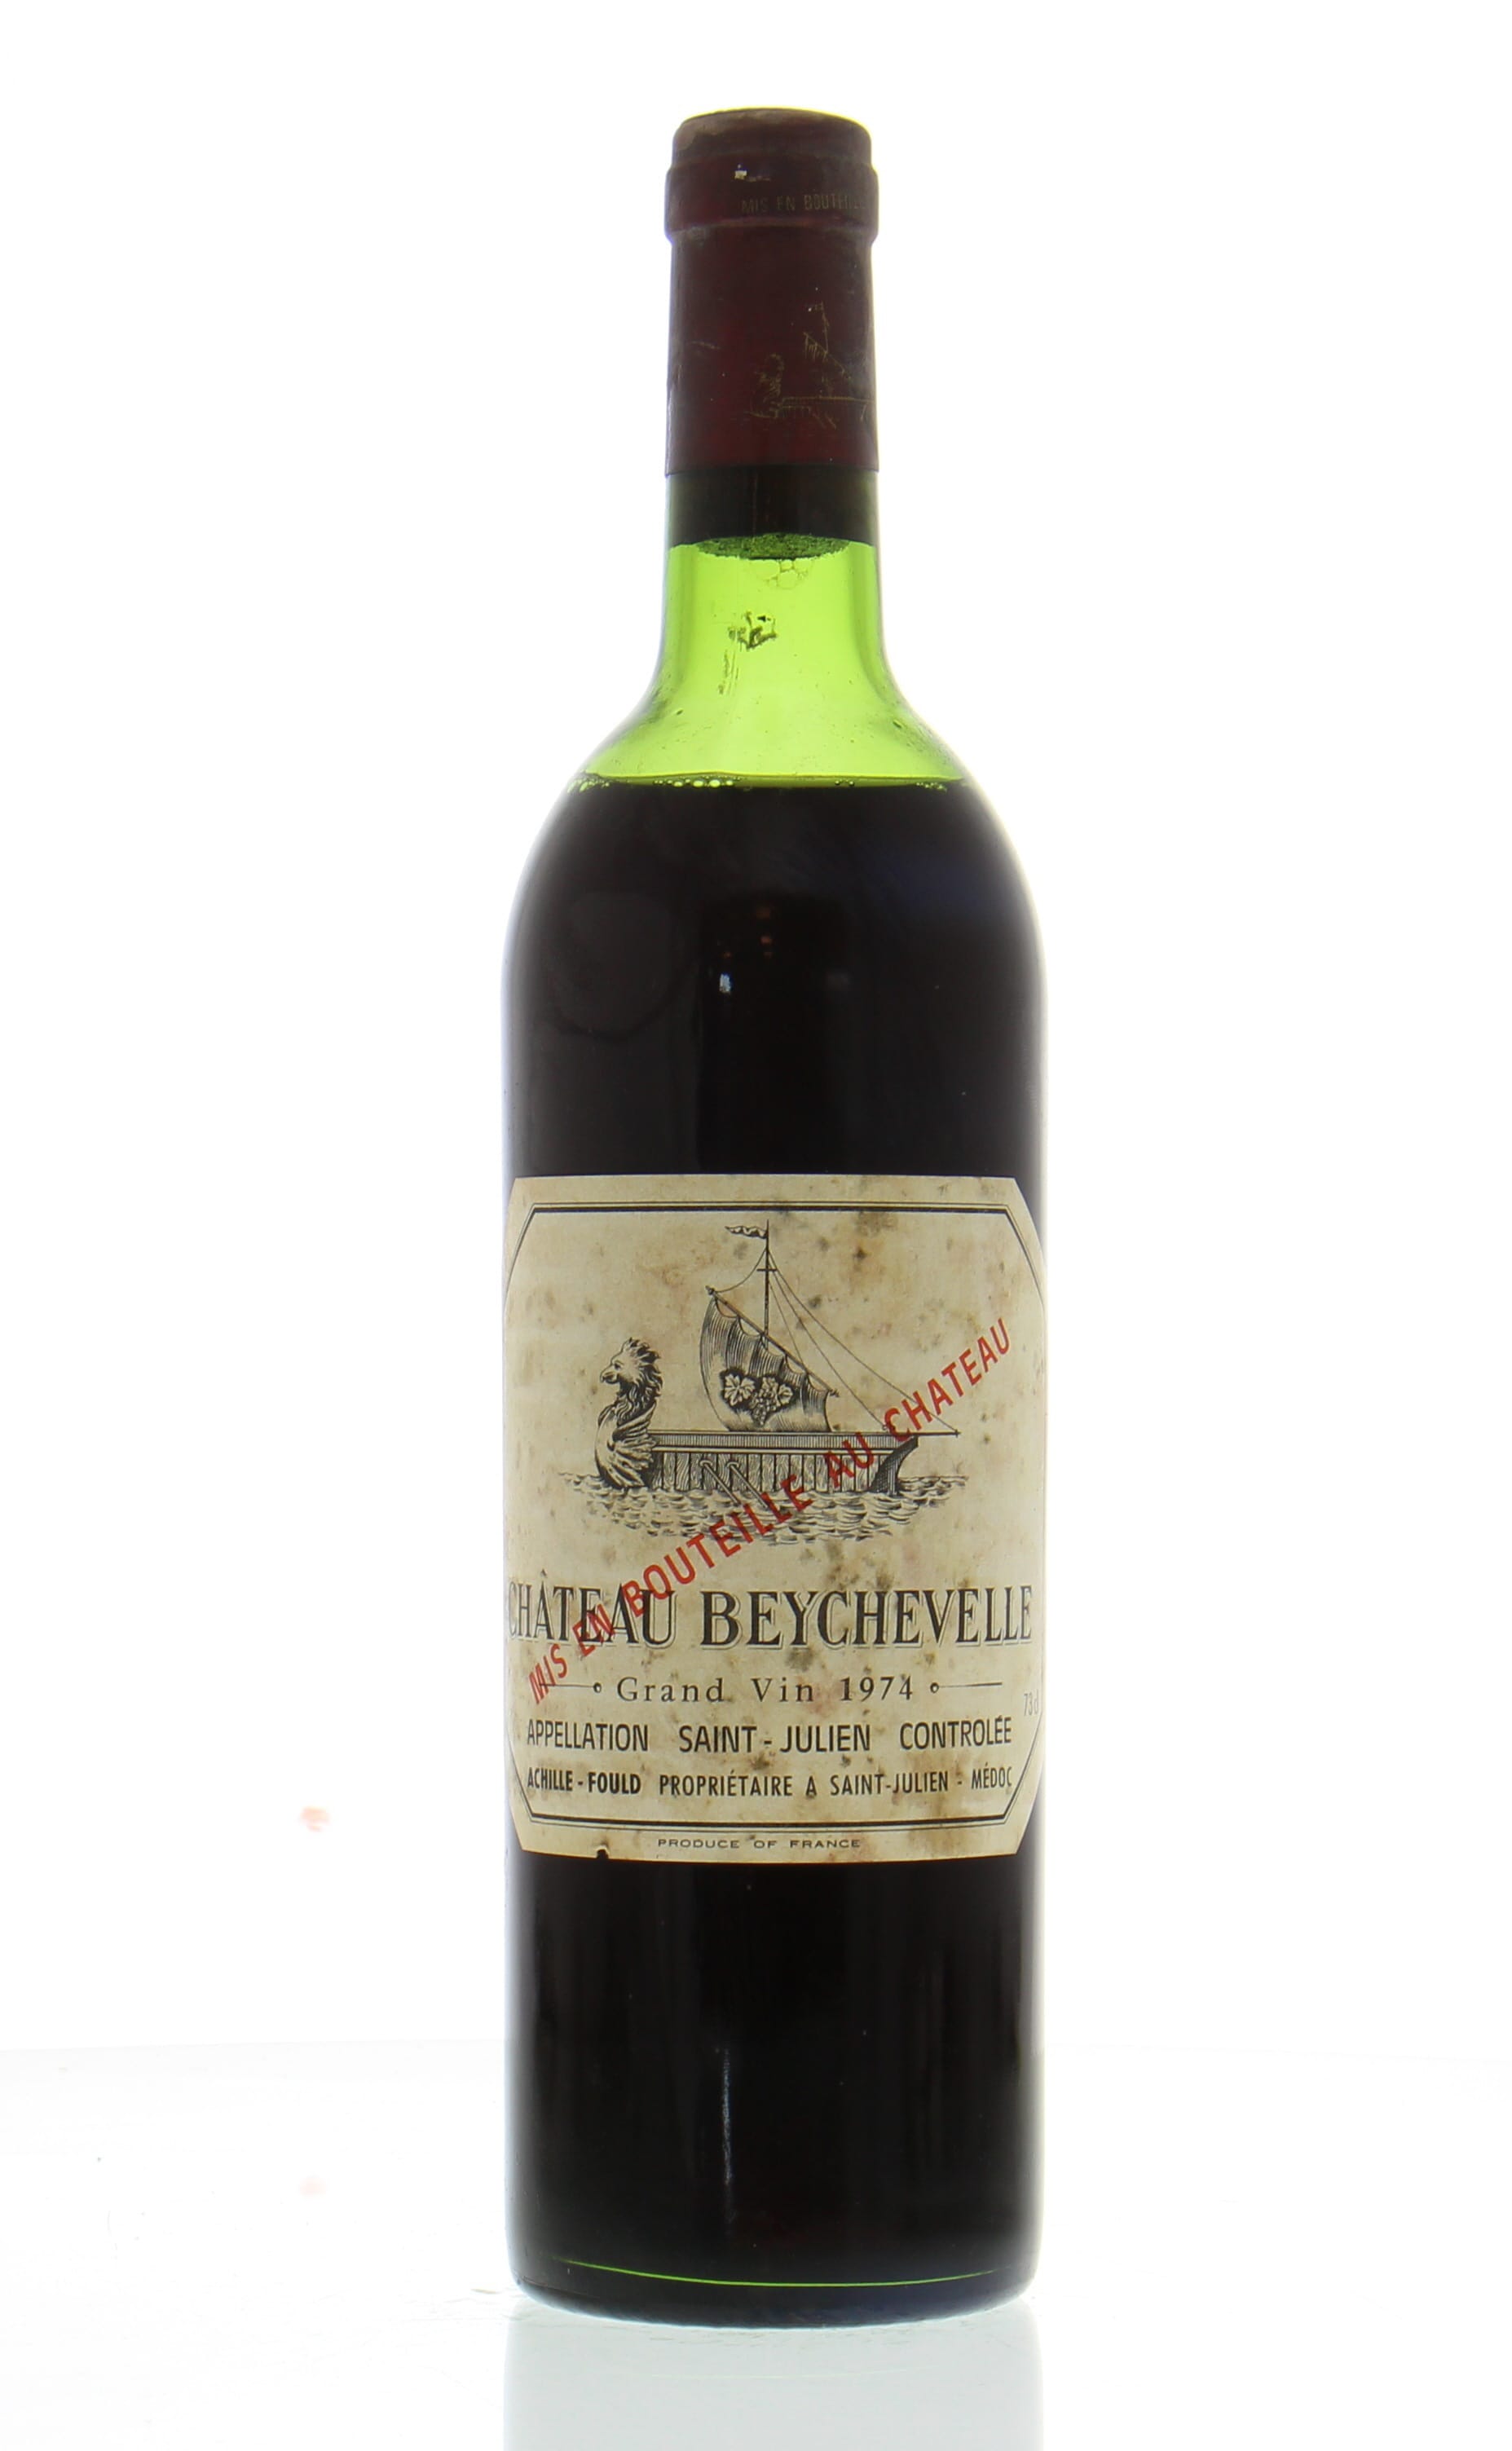 Chateau Beychevelle - Chateau Beychevelle 1974 Mid shoulder